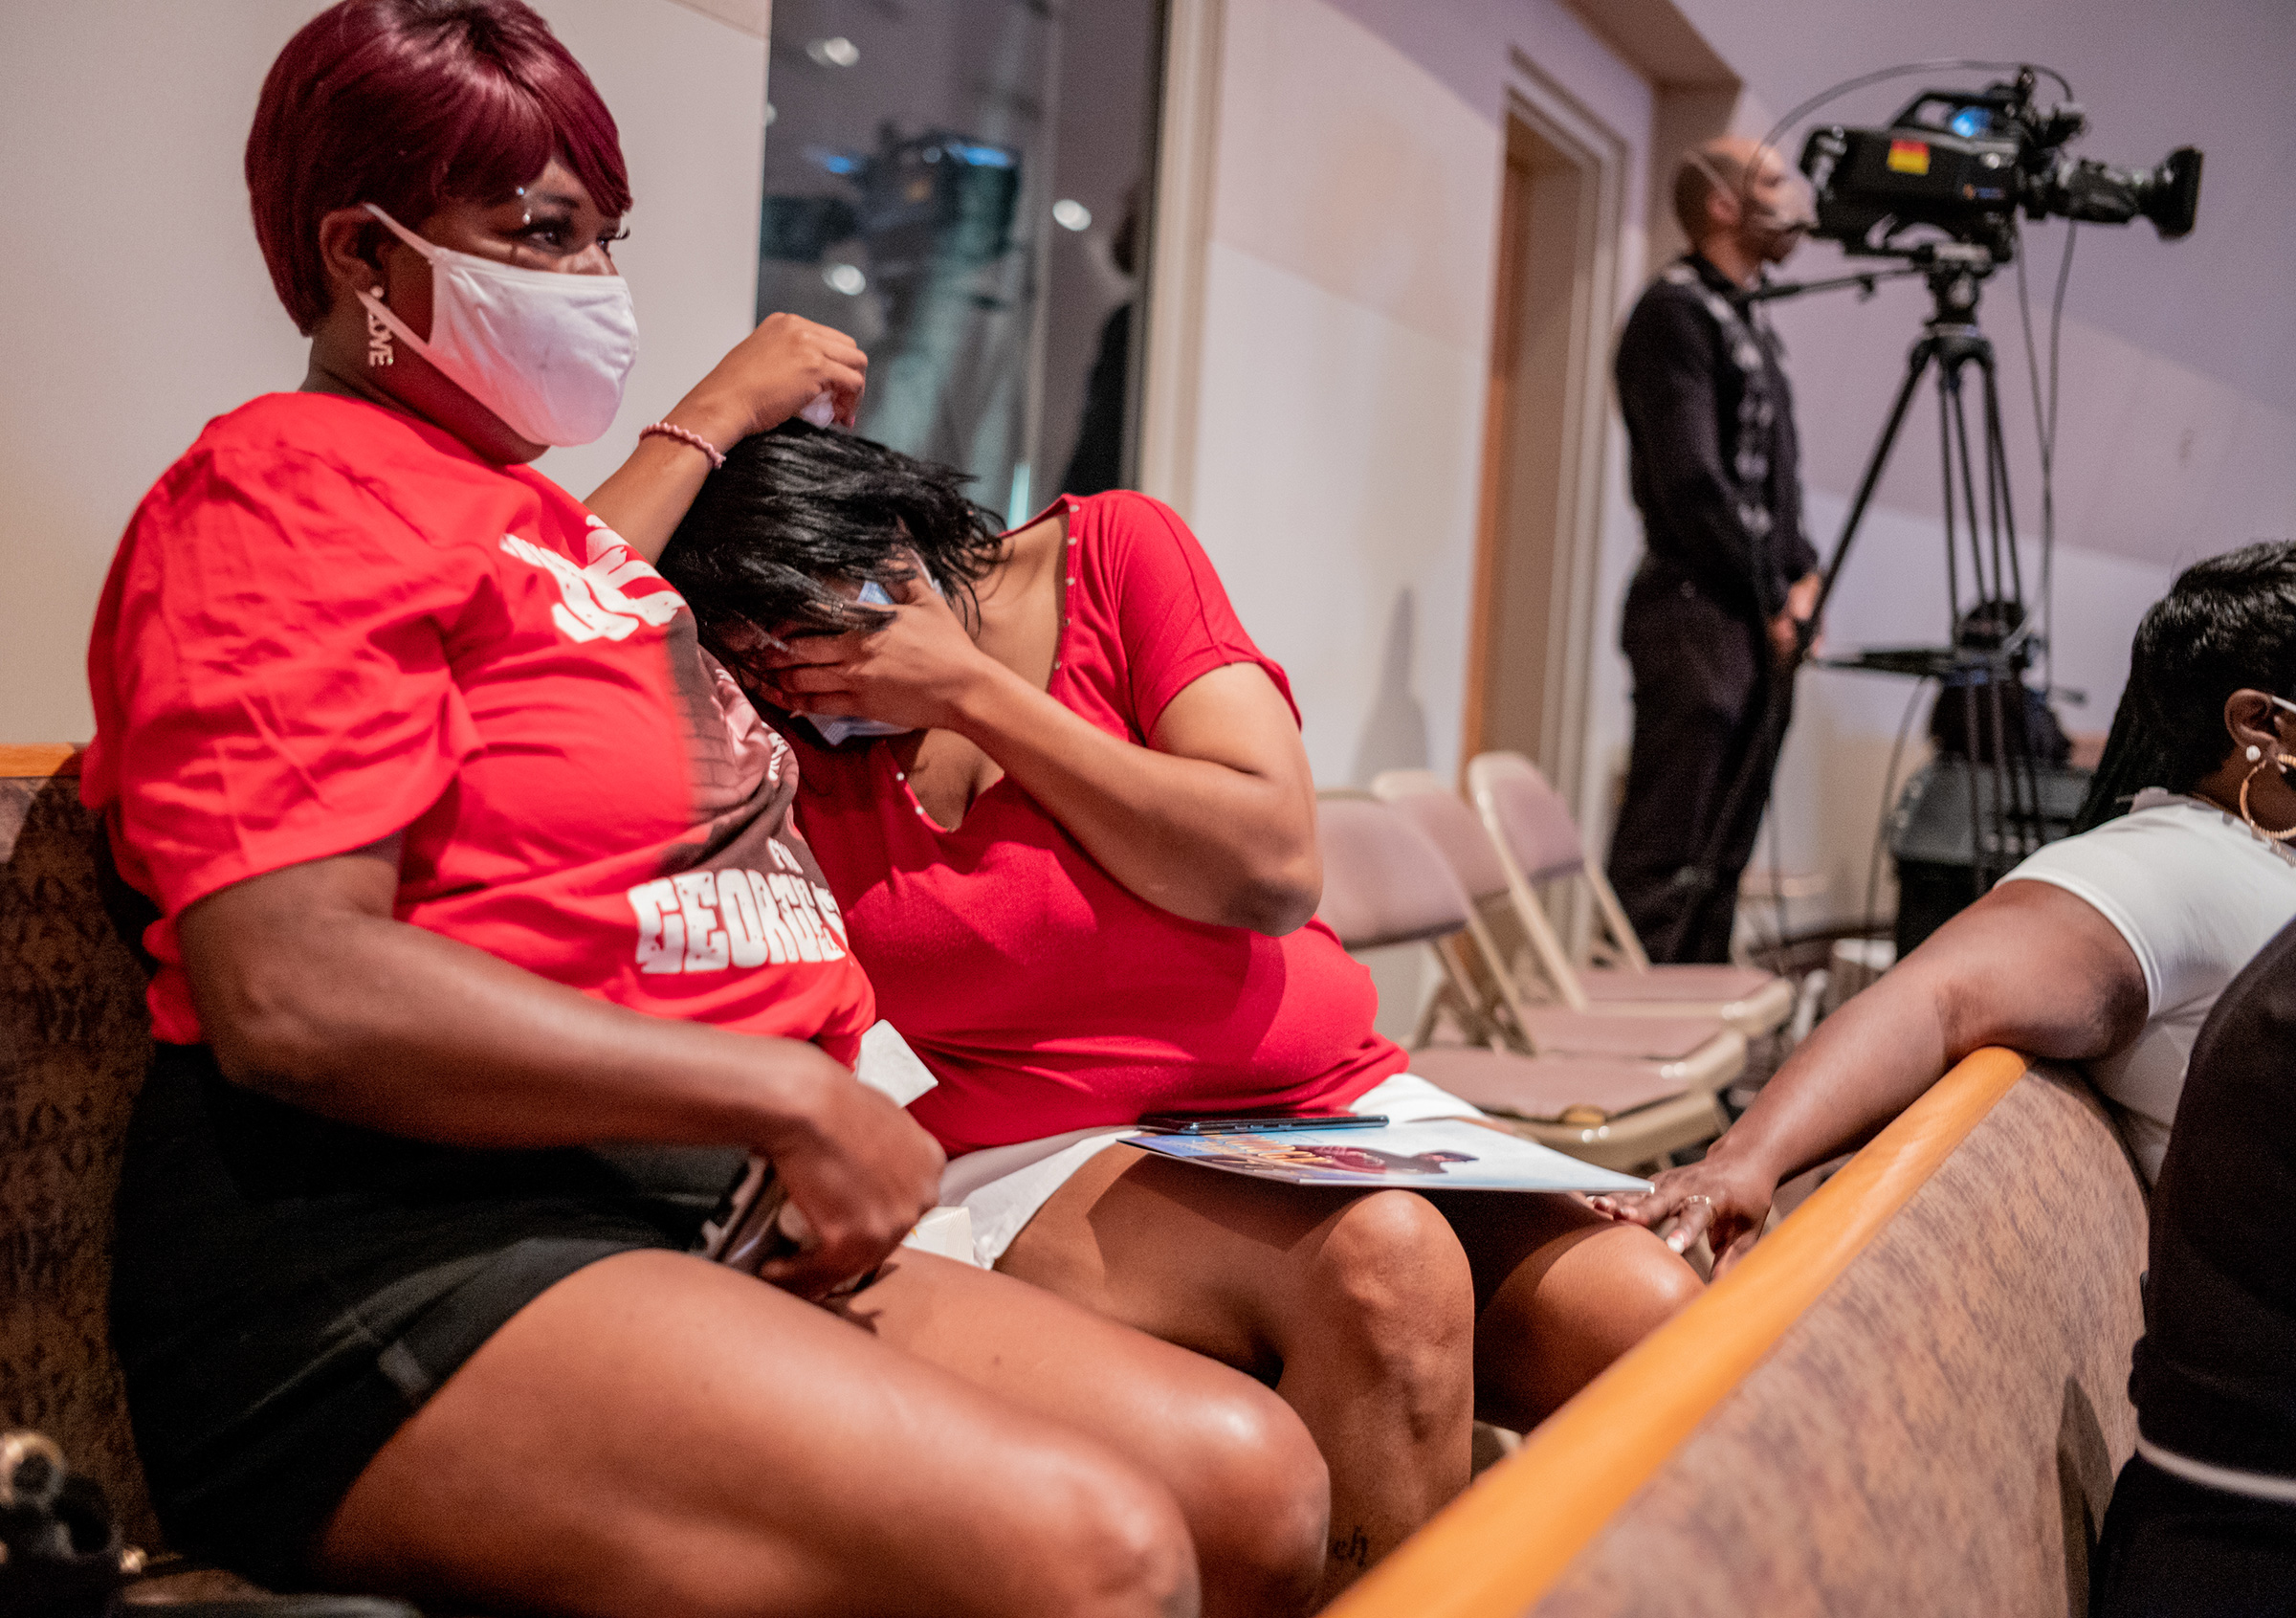 Amalie Mason at emotional moment during the tribute to George Floyd. Family and guests attended the funeral service at The Fountain of Praise Church in Houston on June 9. (Ruddy Roye for TIME)